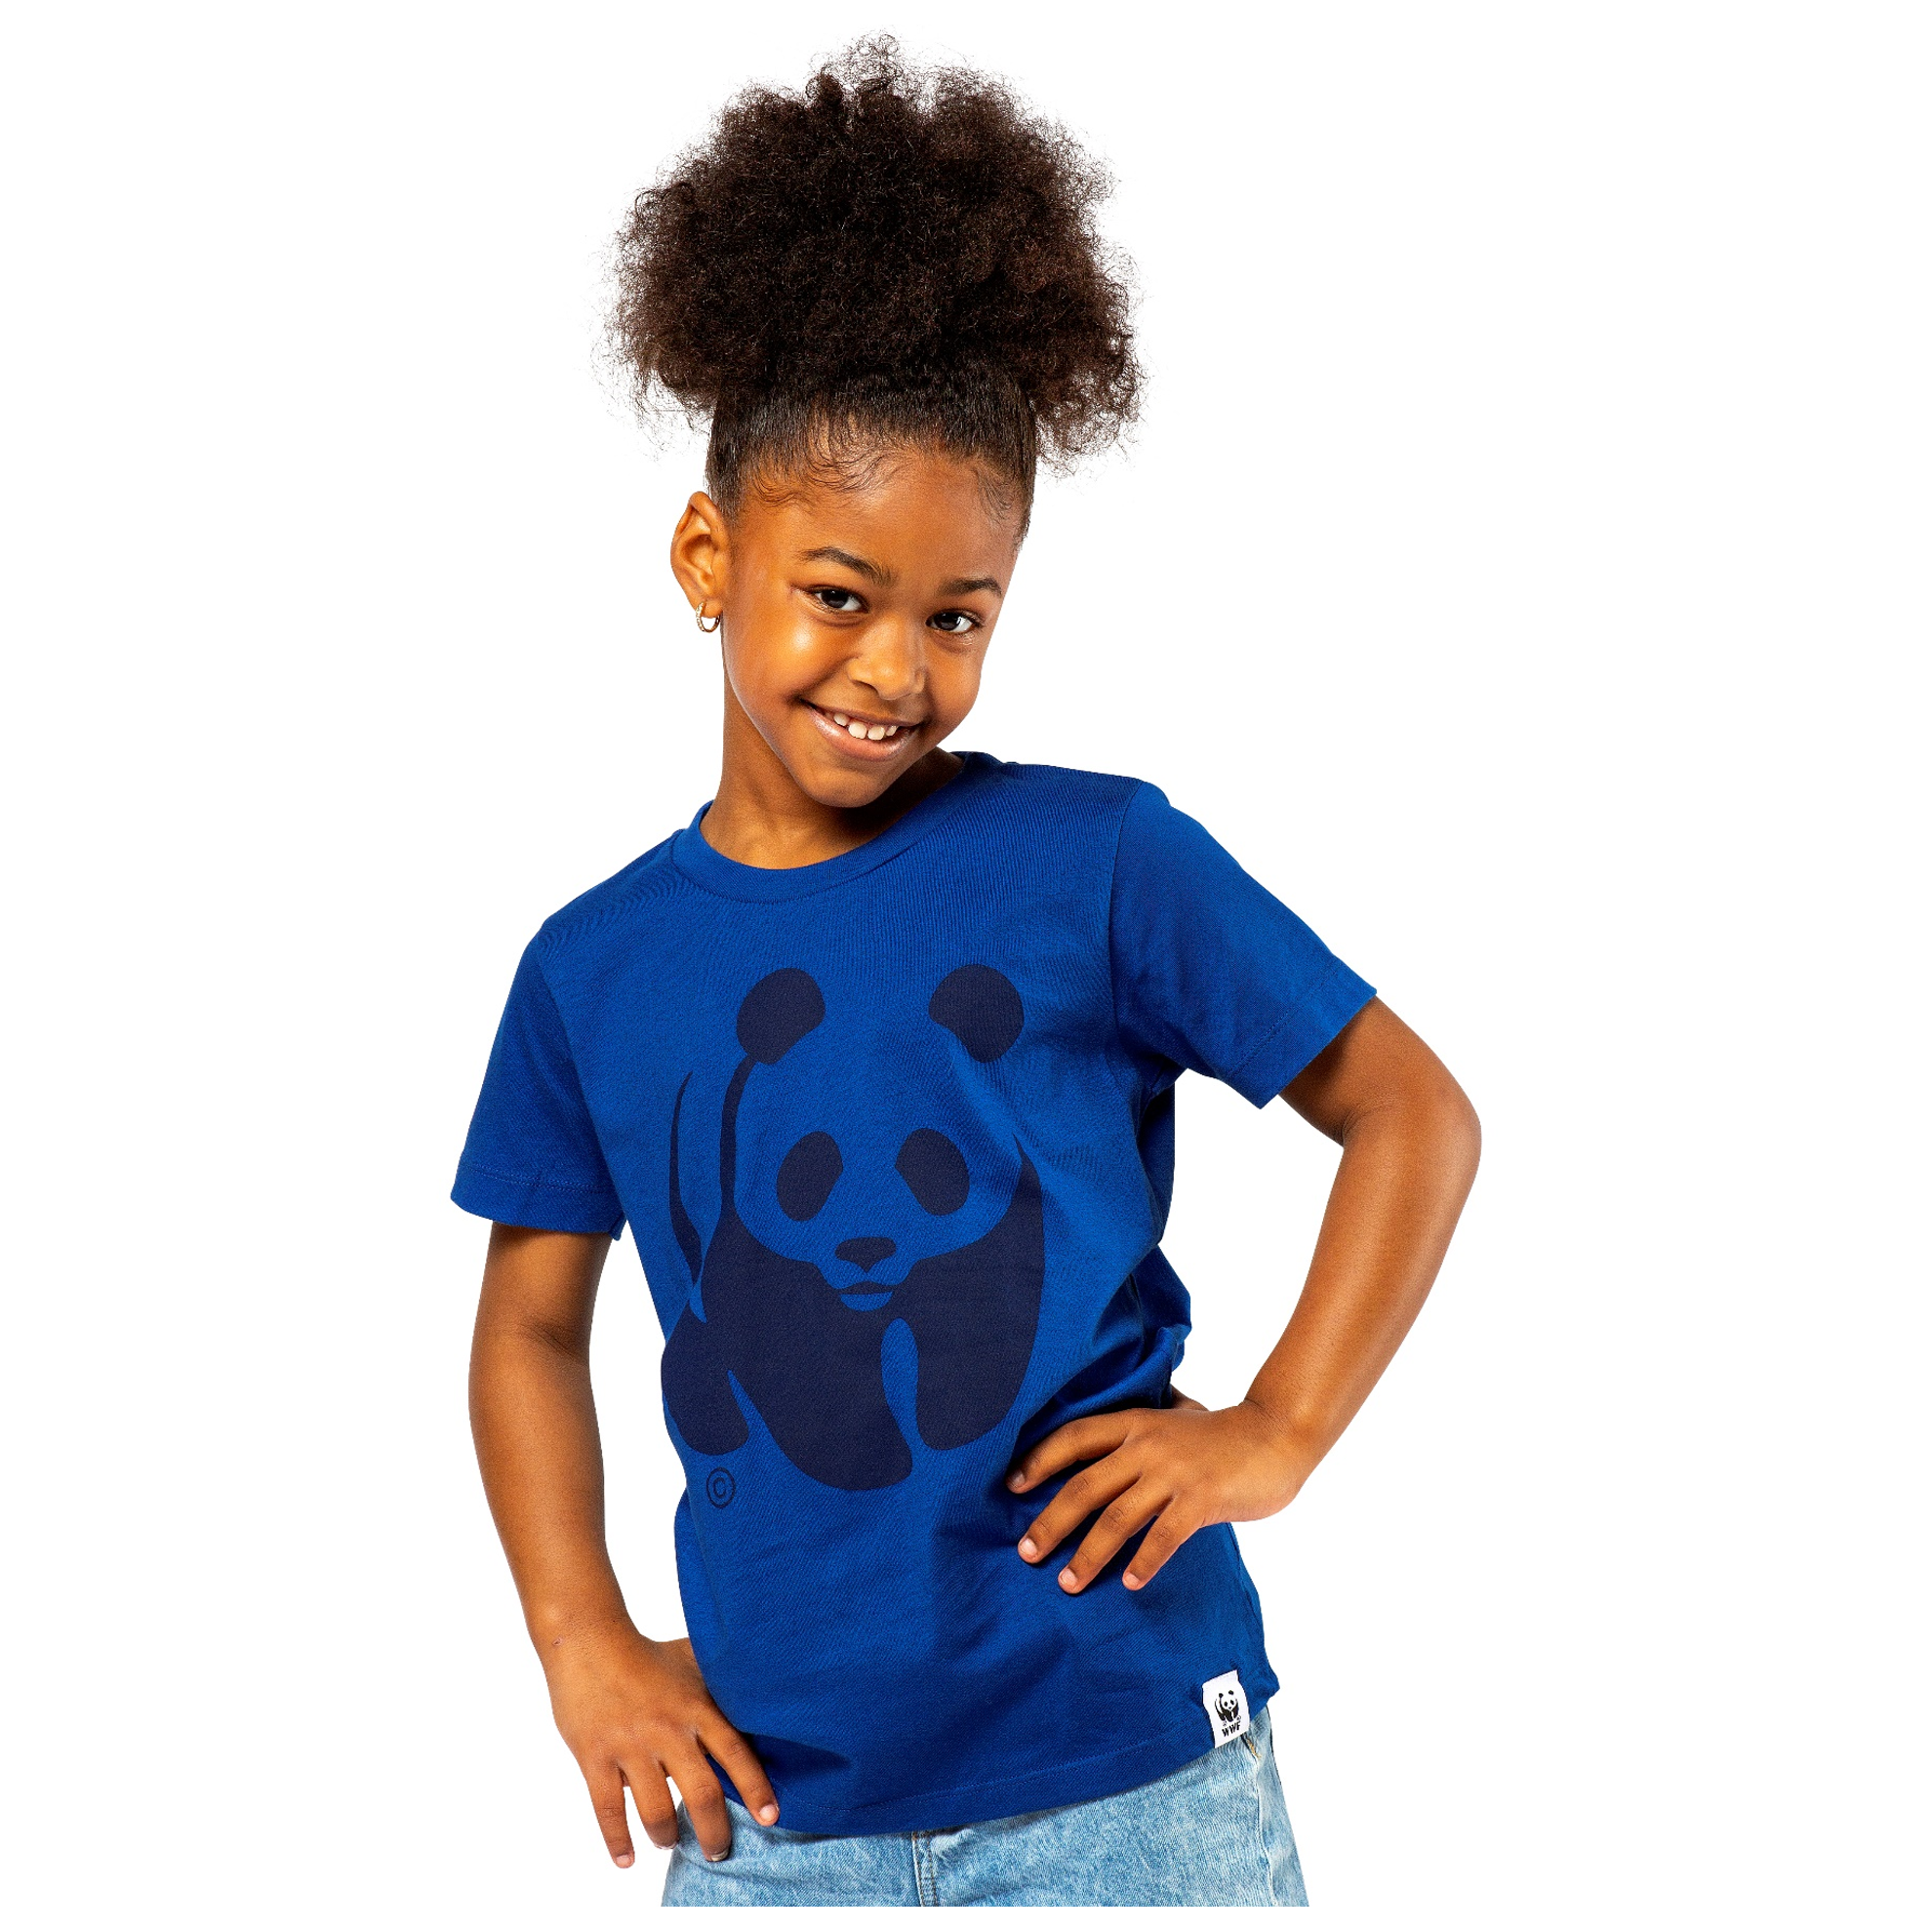 Child wearing the blue youth t-shirt with panda logo